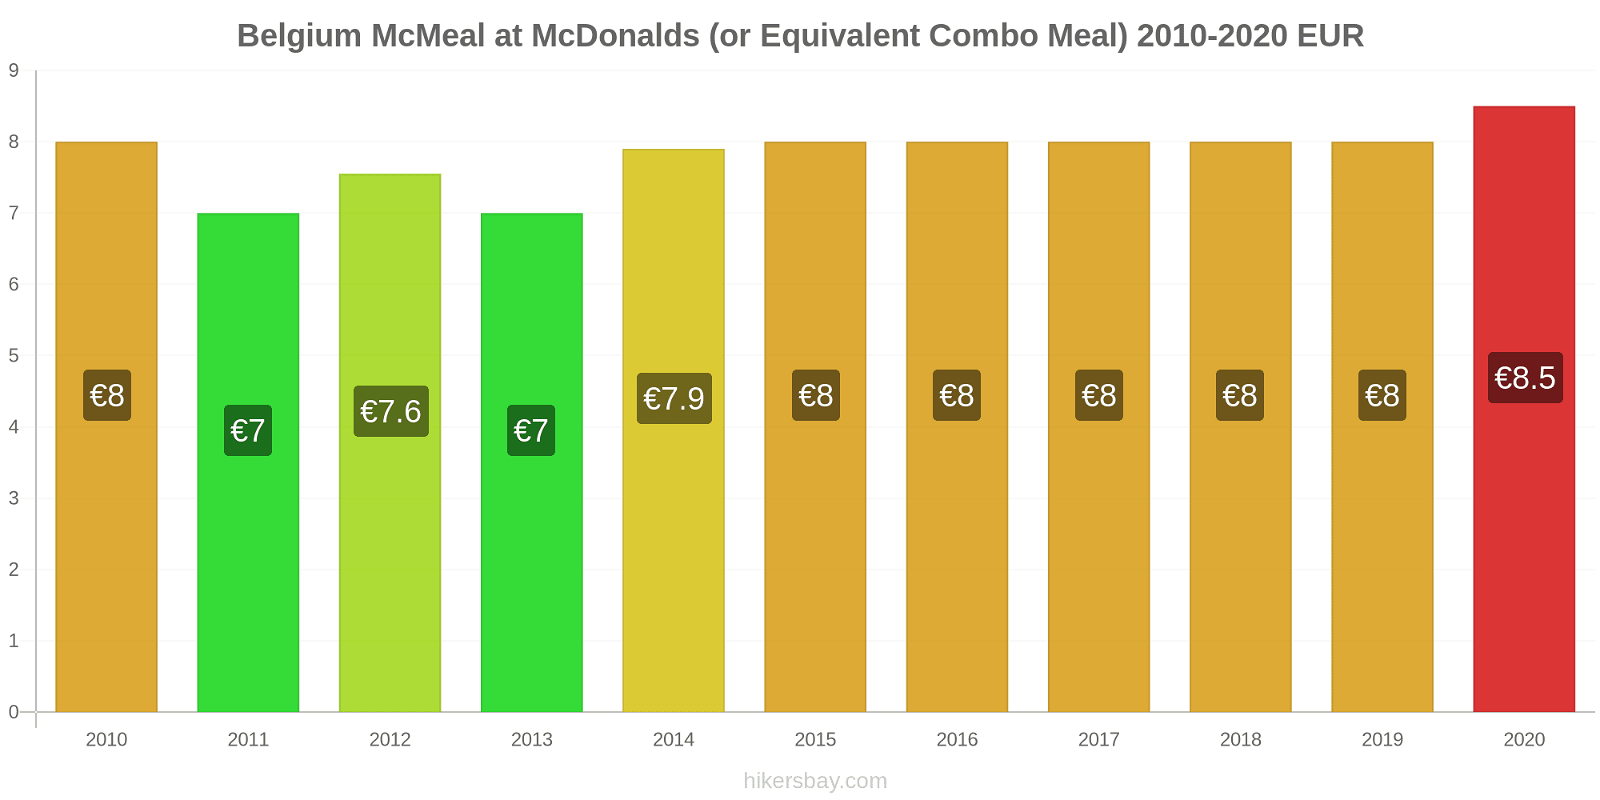 Belgium price changes McMeal at McDonalds (or Equivalent Combo Meal) hikersbay.com